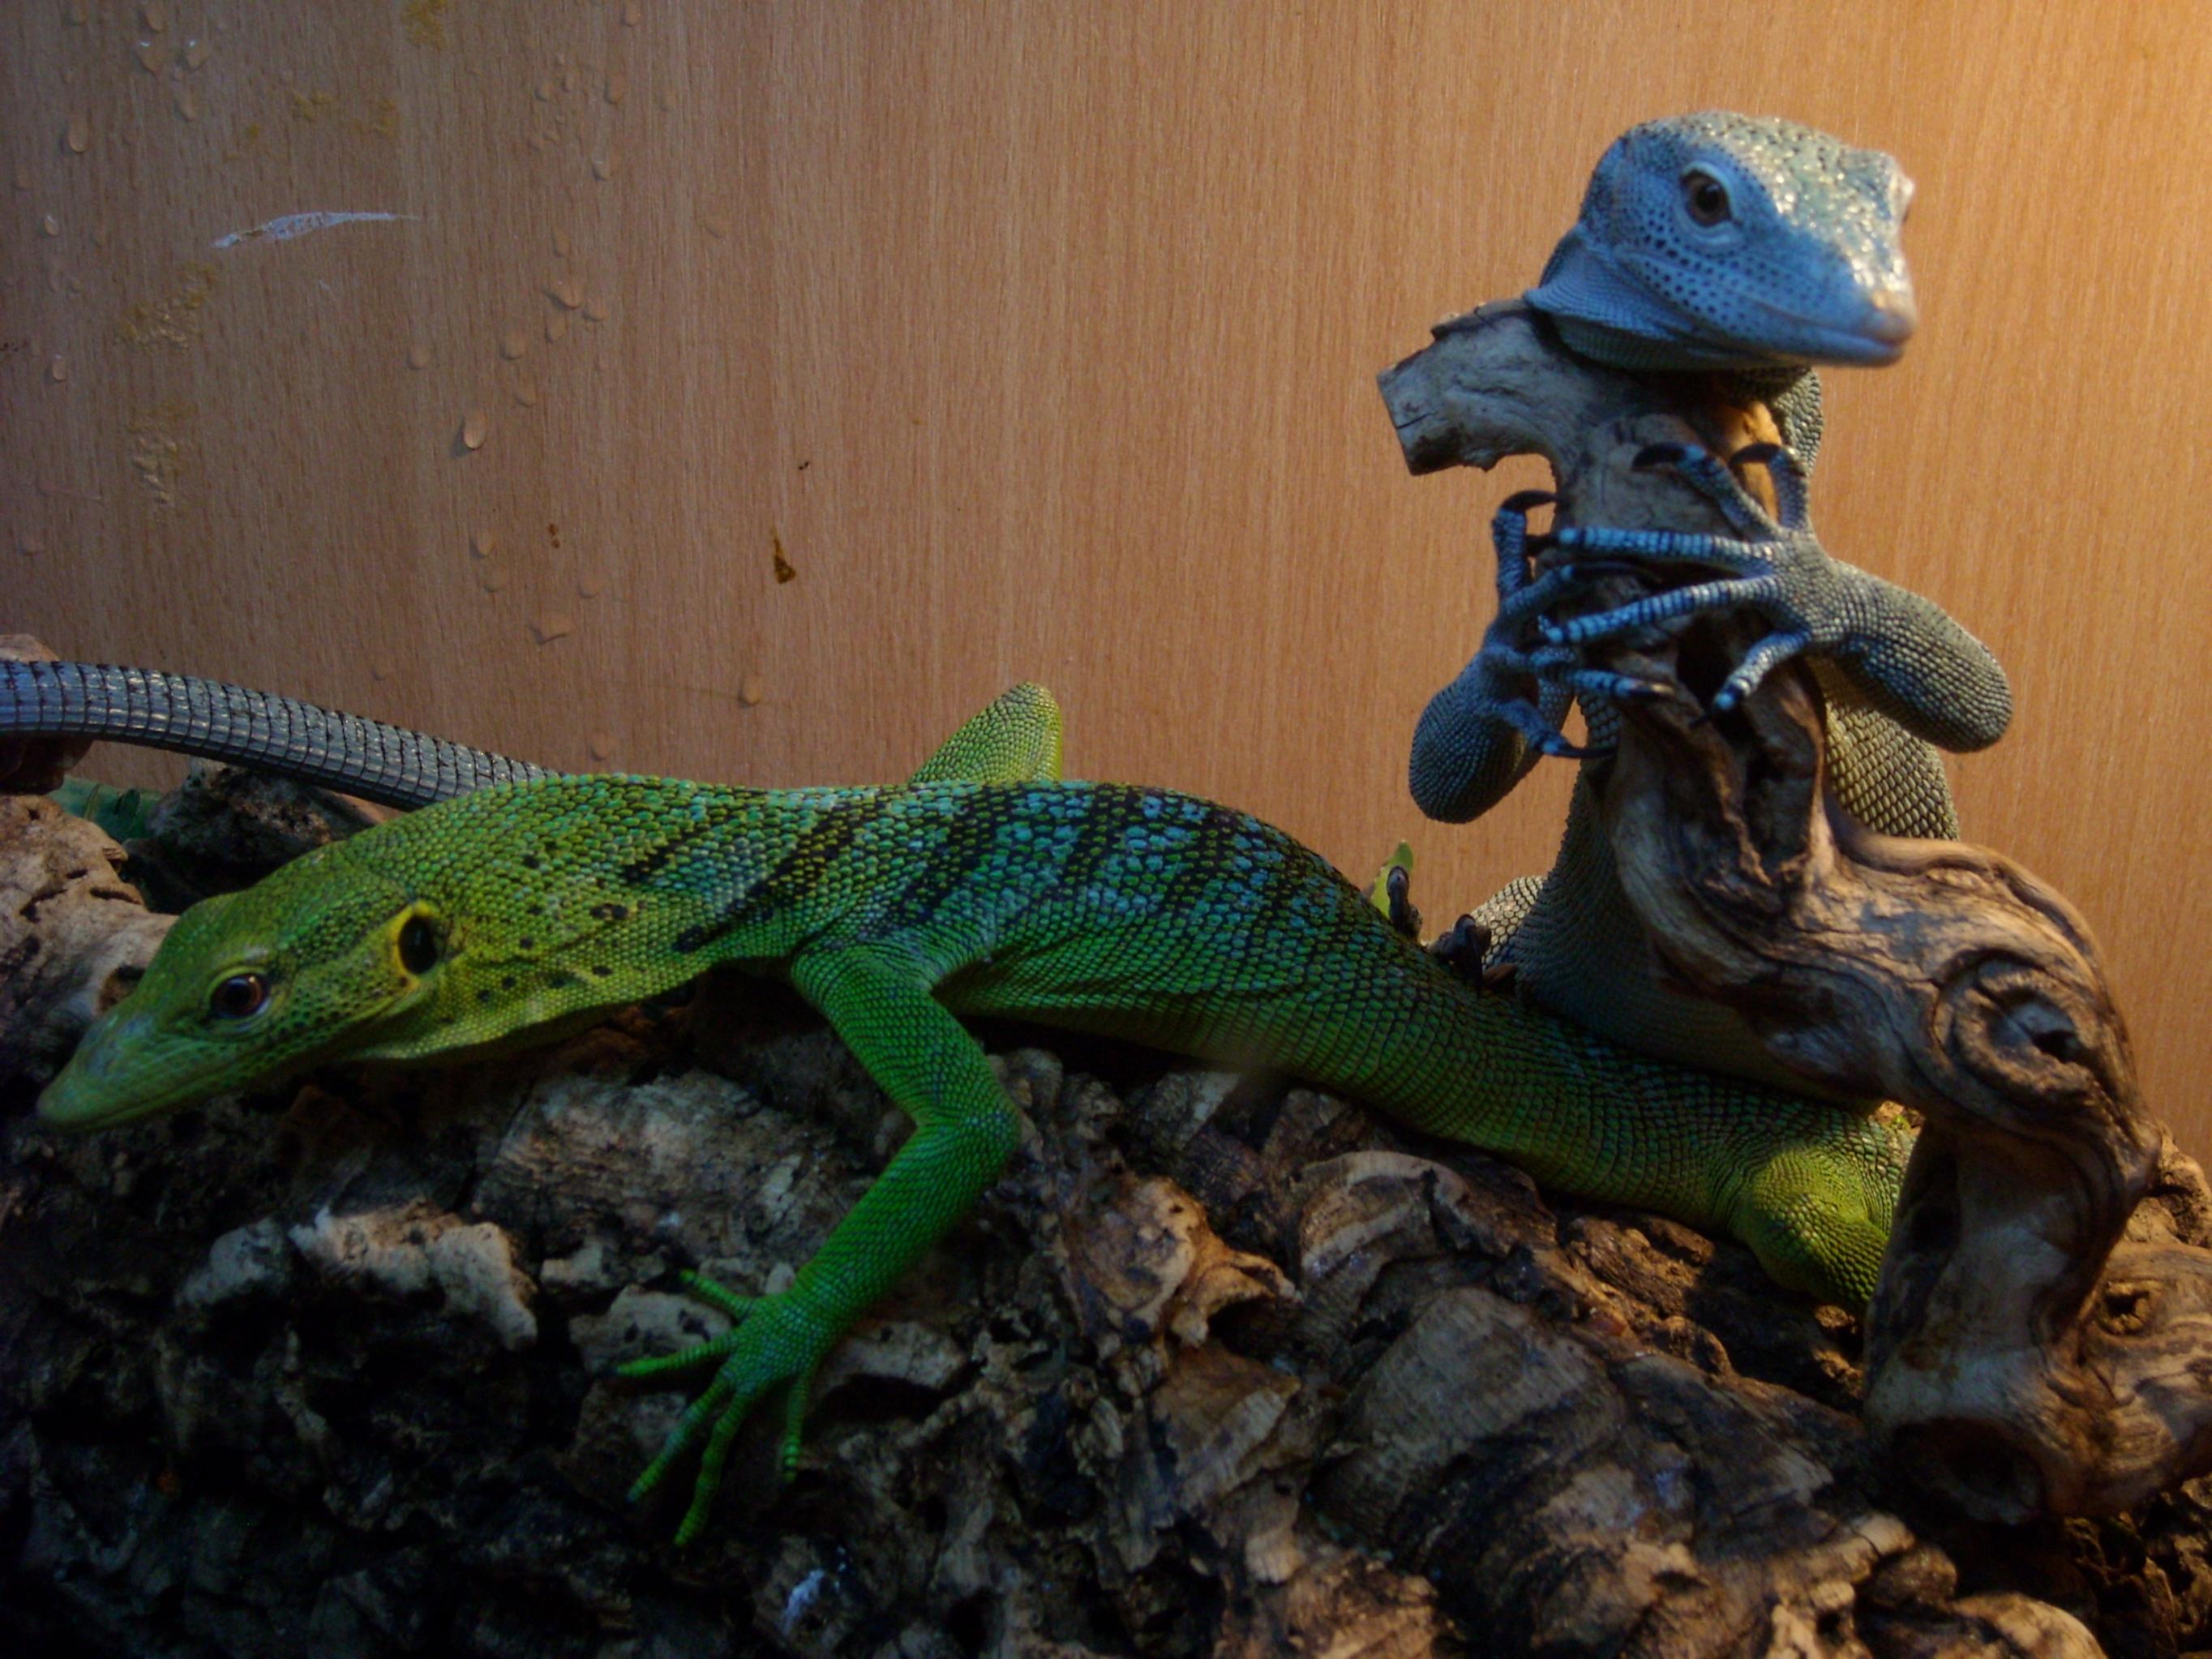 SE England Emerald Tree Monitors for Sale Portsmouth - Reptile Forums